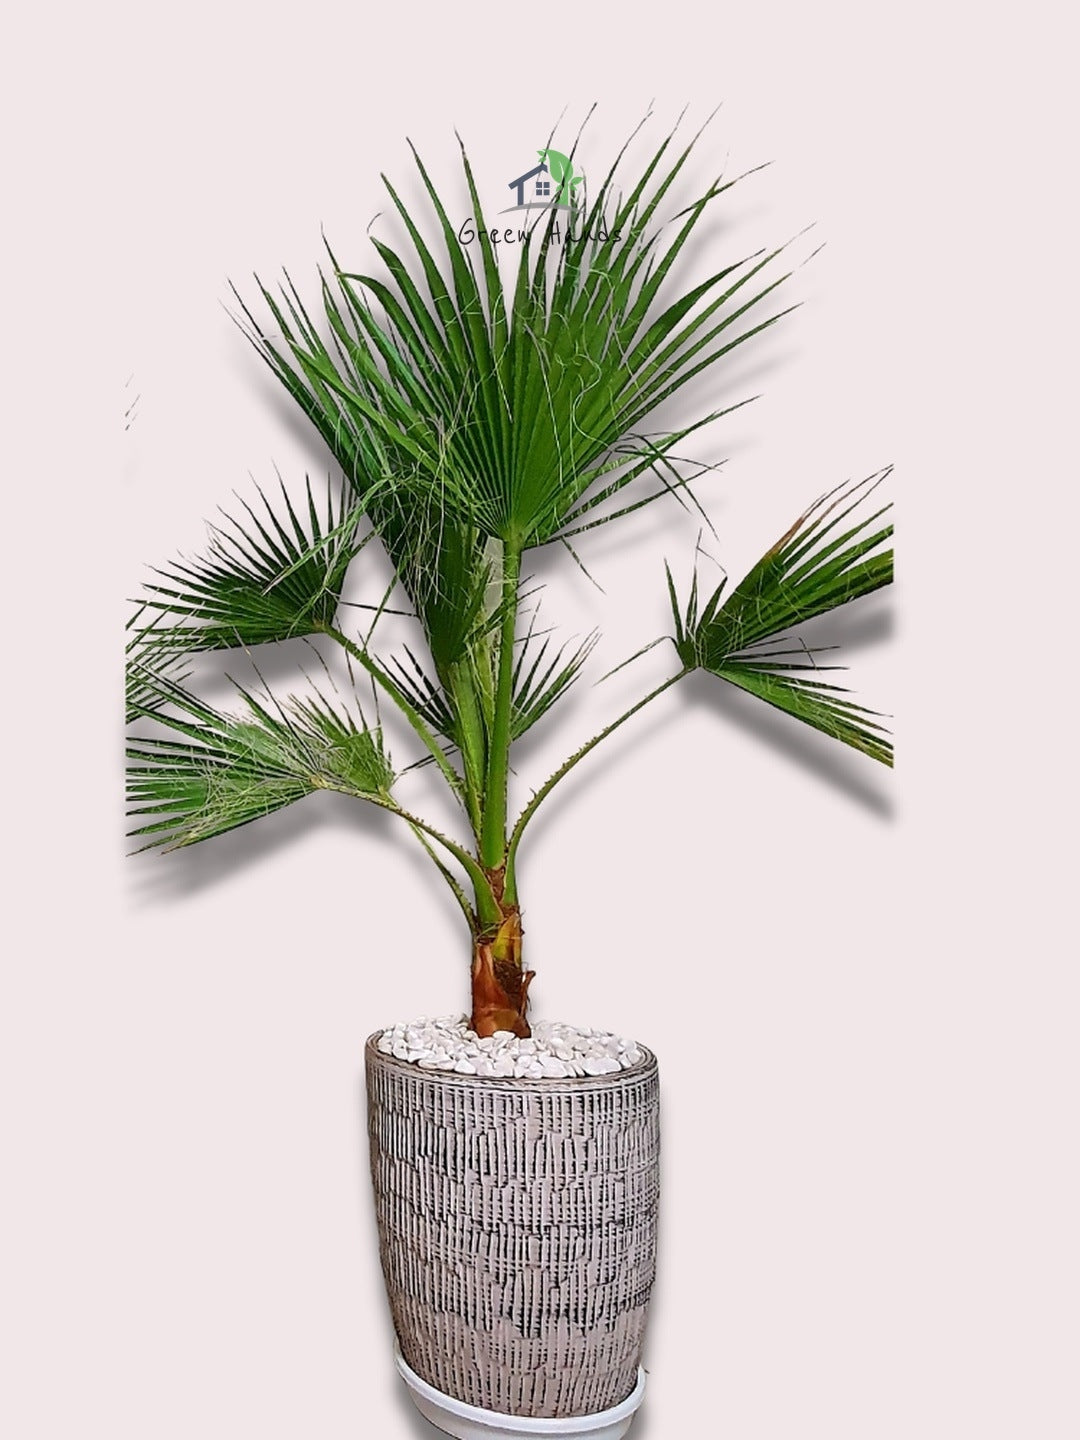 Potted Washington Palm Planted in Grey Ceramic Pot